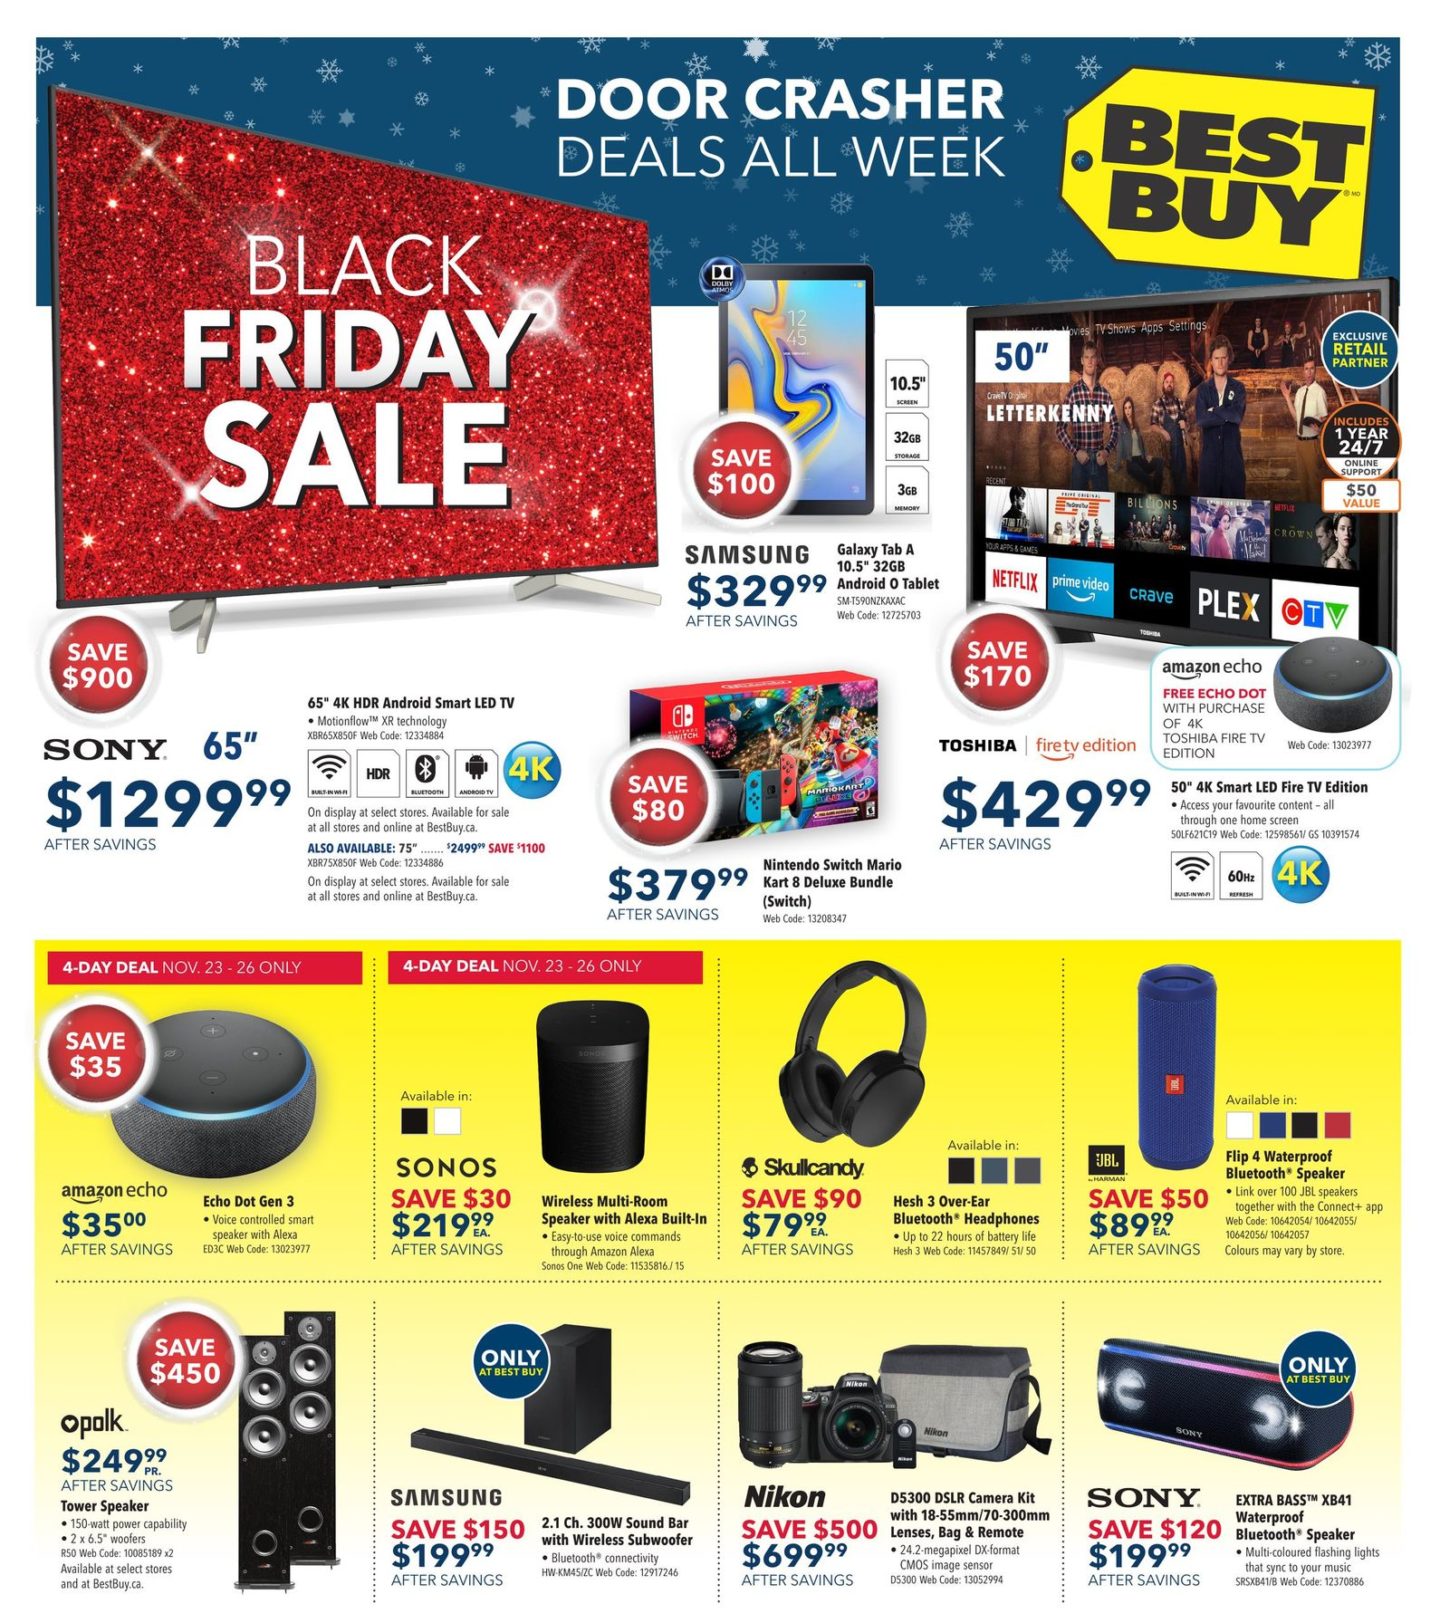 Best Buy Black Friday Flyer Deals 2019 Canada - How Are Black Friday Deals Possible